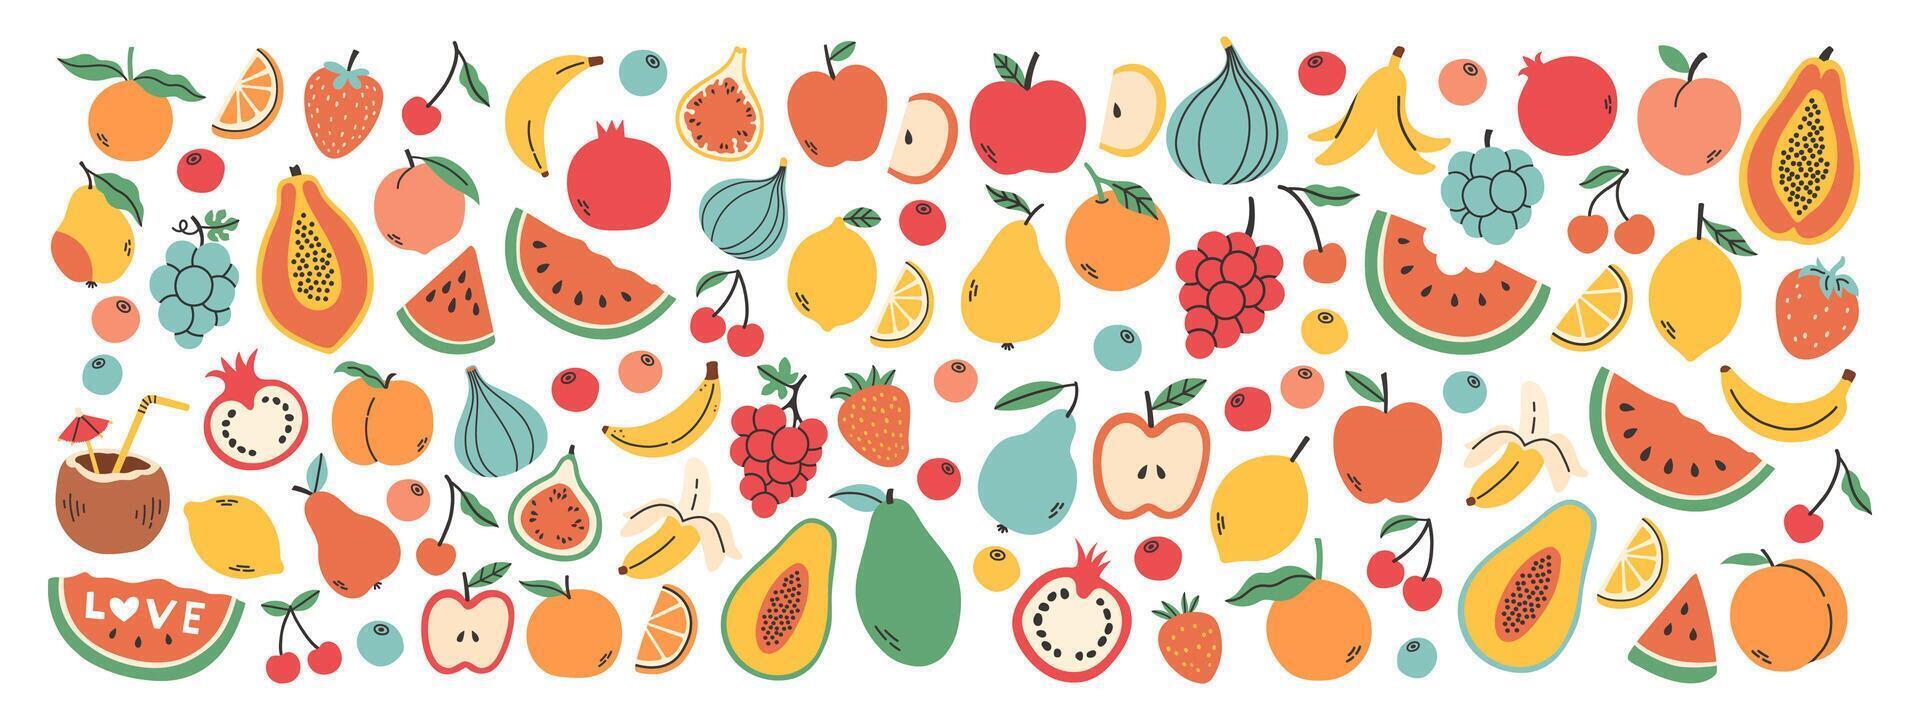 Set of different fruits and berries. Collection of organic vitamins and healthy nutrition. Watermelon, pineapple, banana, peach. Colored flat illustration isolated on white background. vector